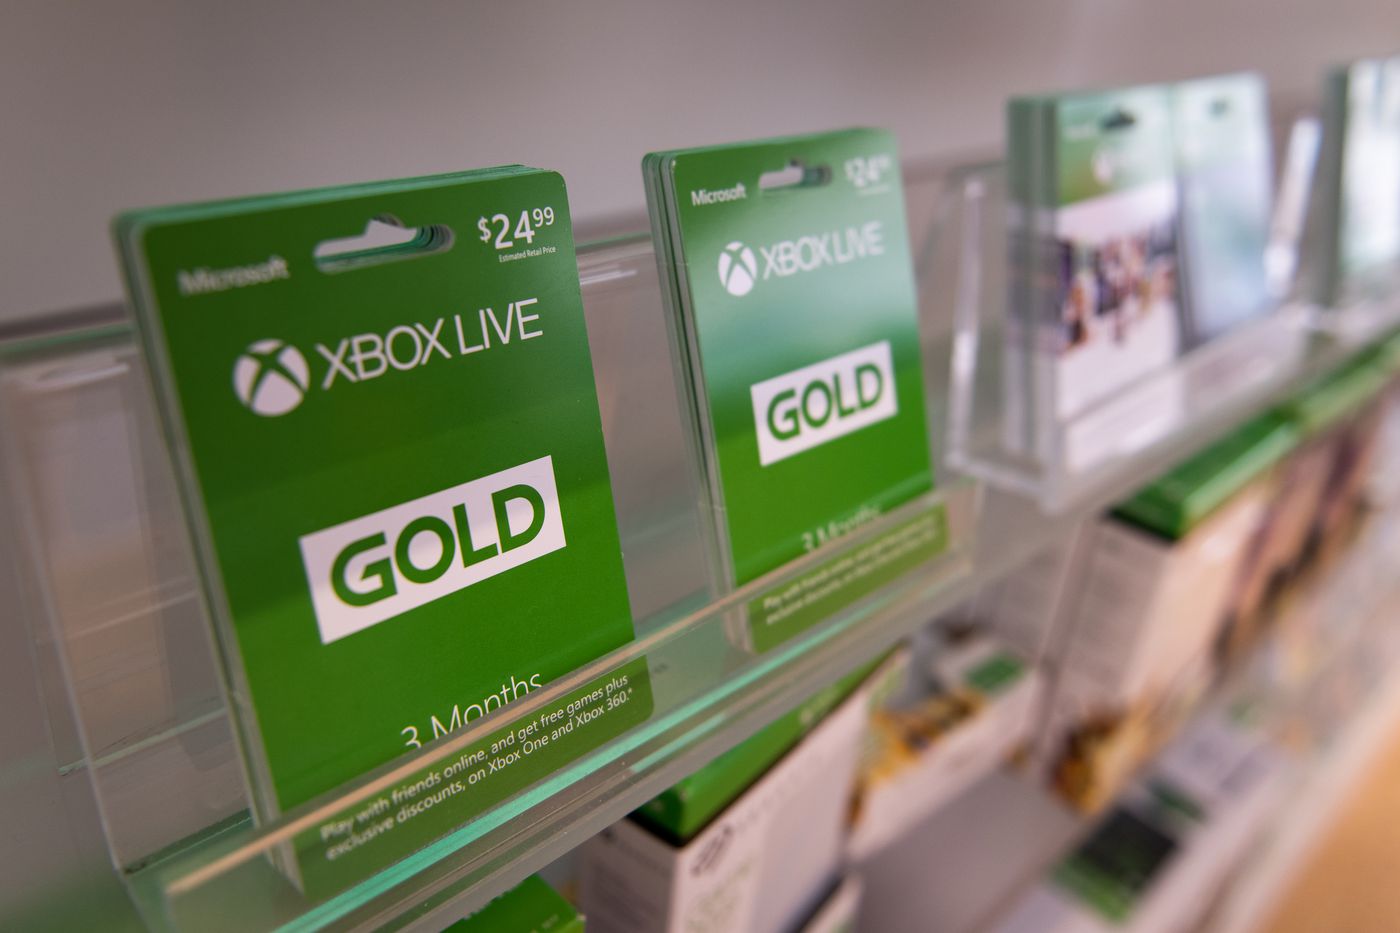 tragedie træfning holdall Microsoft decides not to increase Xbox Live Gold prices, citing outcry -  Polygon